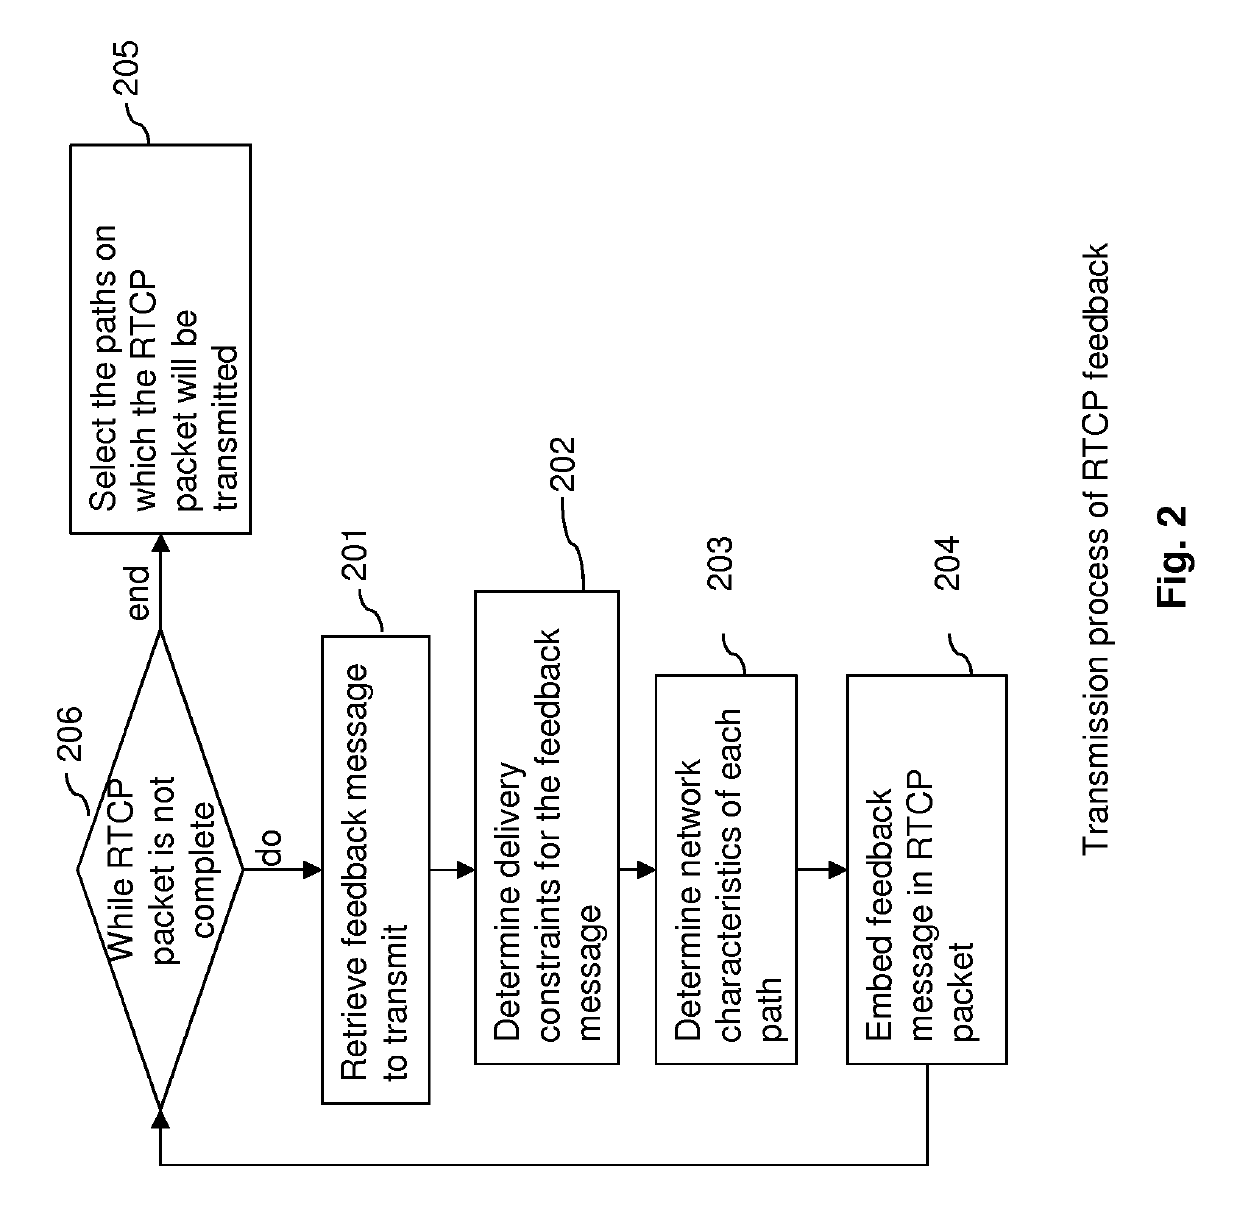 Feedback management in a multipath communication network